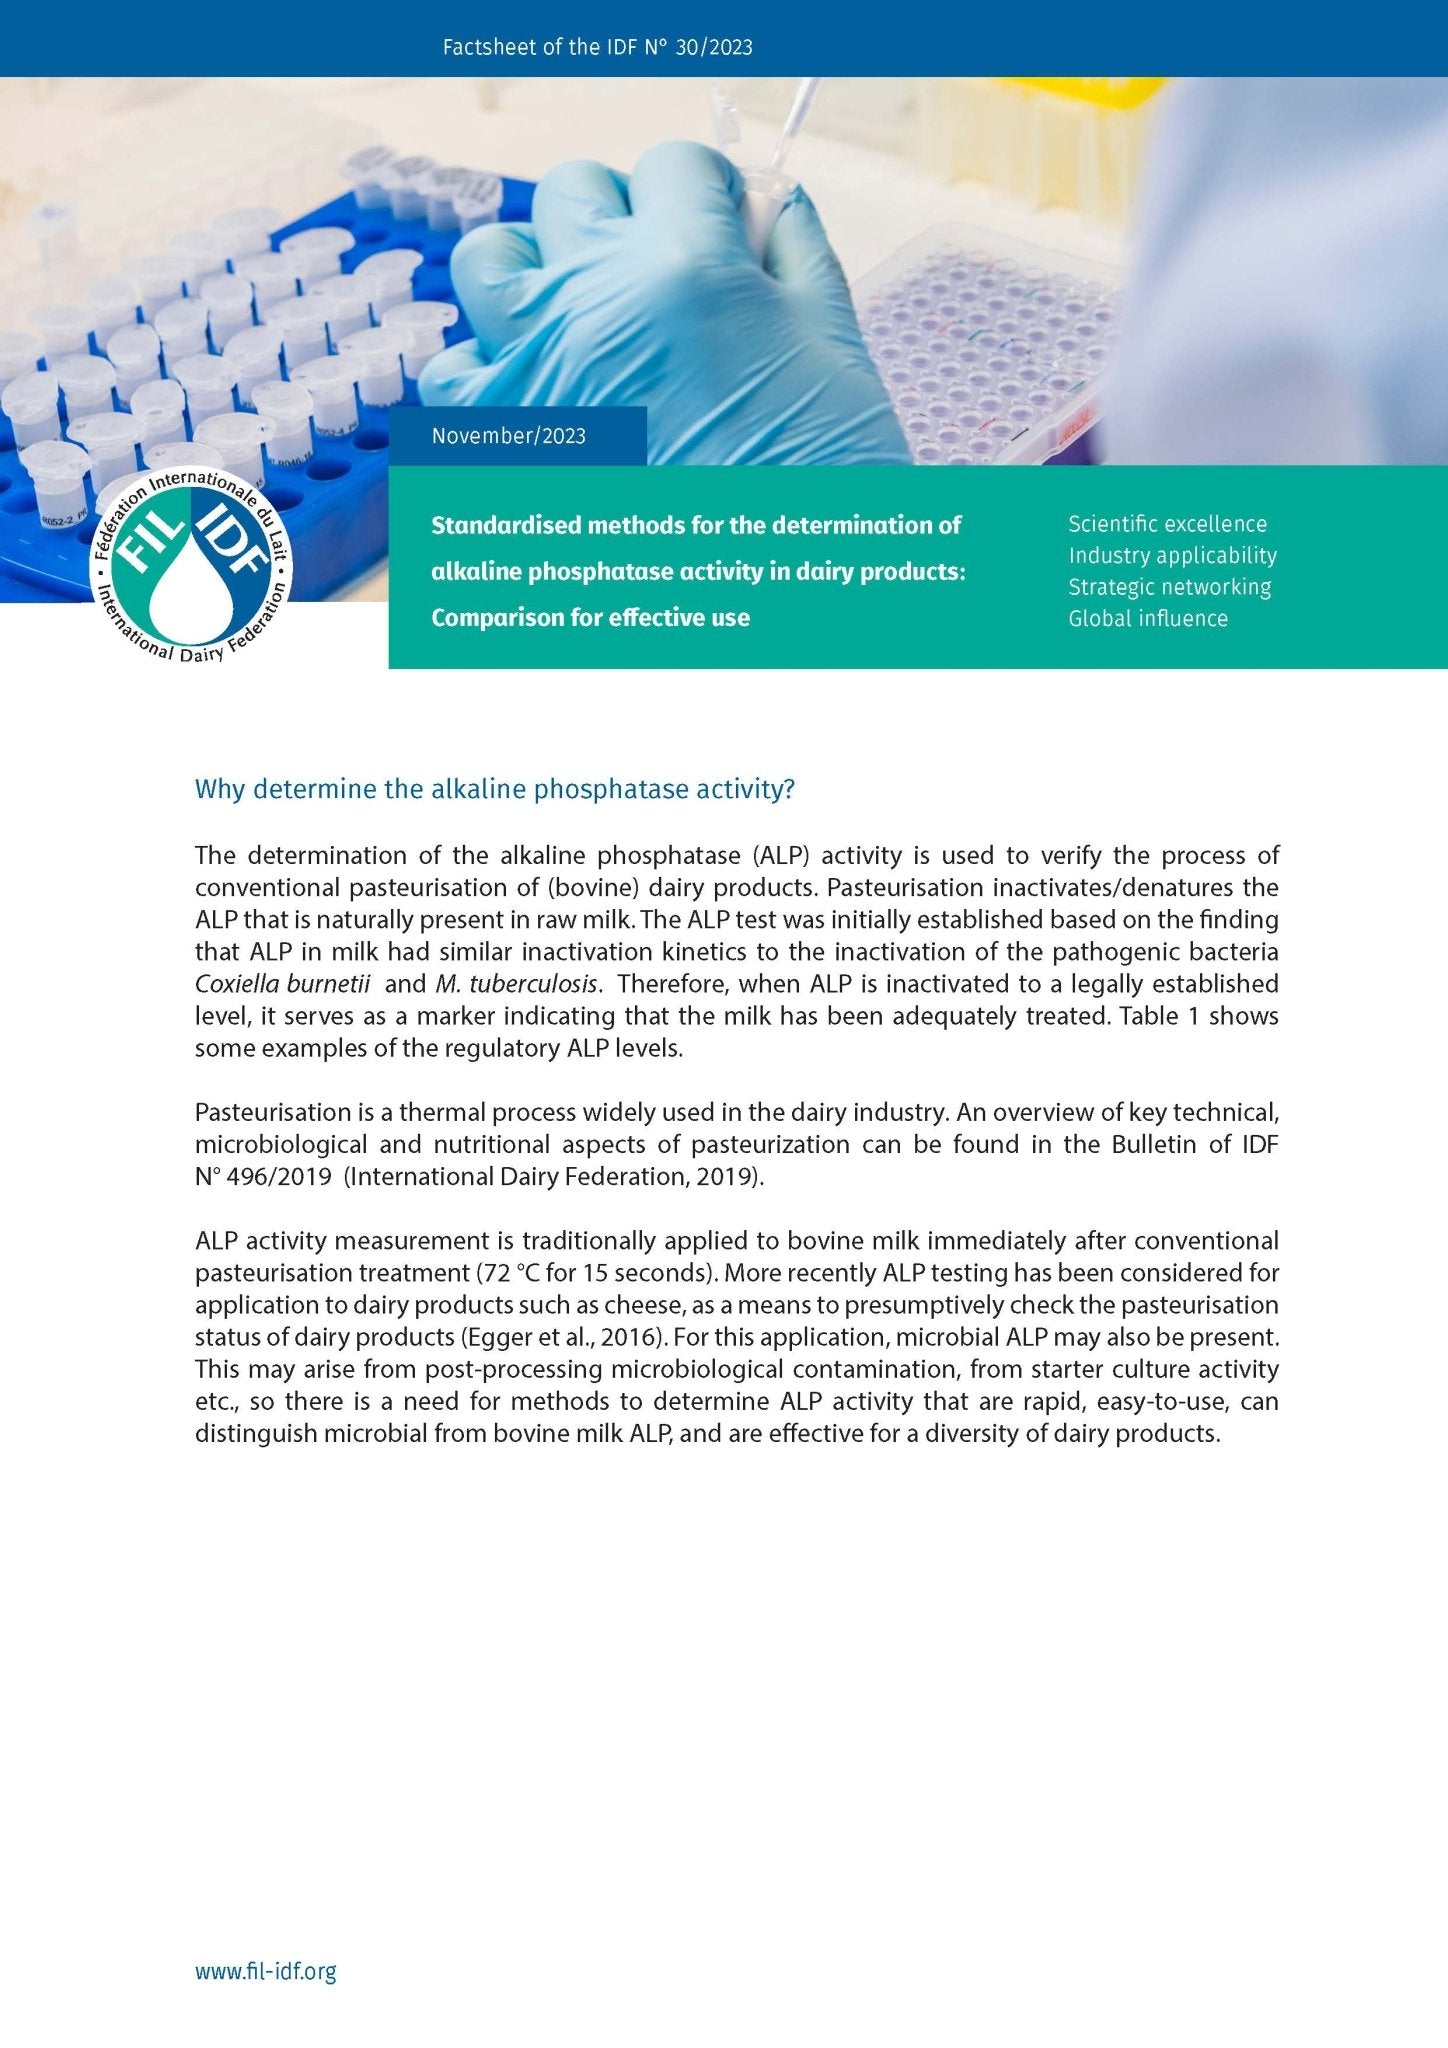 Factsheet of the IDF N° 30/2023: Standardized methods for the determination of alkaline phosphatase activity in dairy products: Comparison for effective use - FIL-IDF